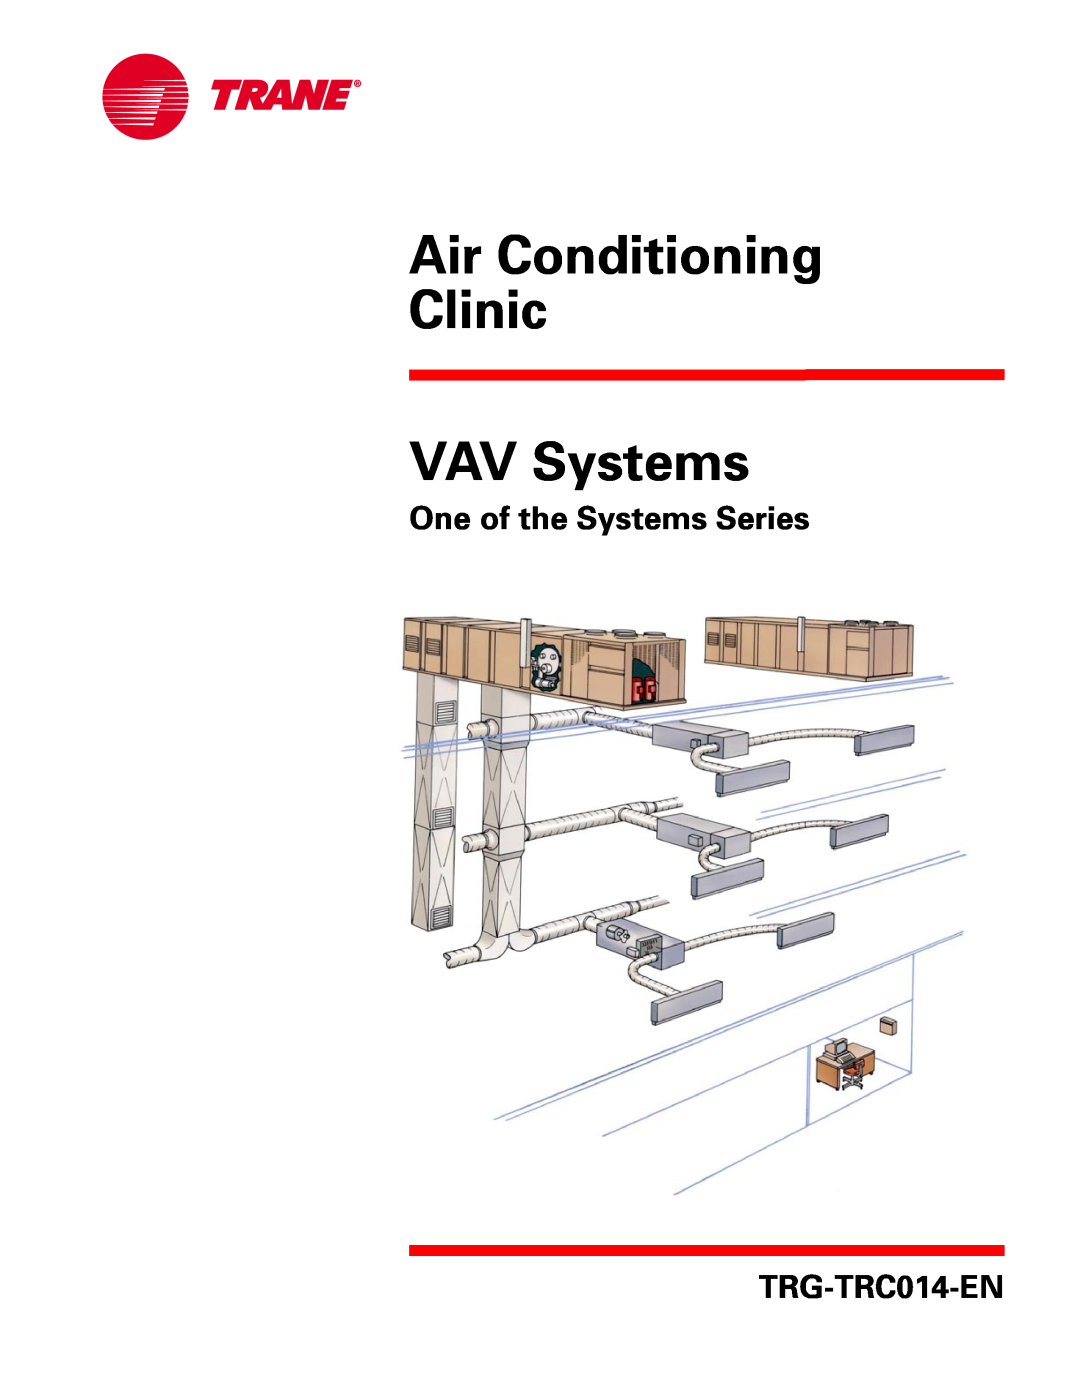 Trane TRG-TRC014-EN manual Air Conditioning Clinic VAV Systems, One of the Systems Series 